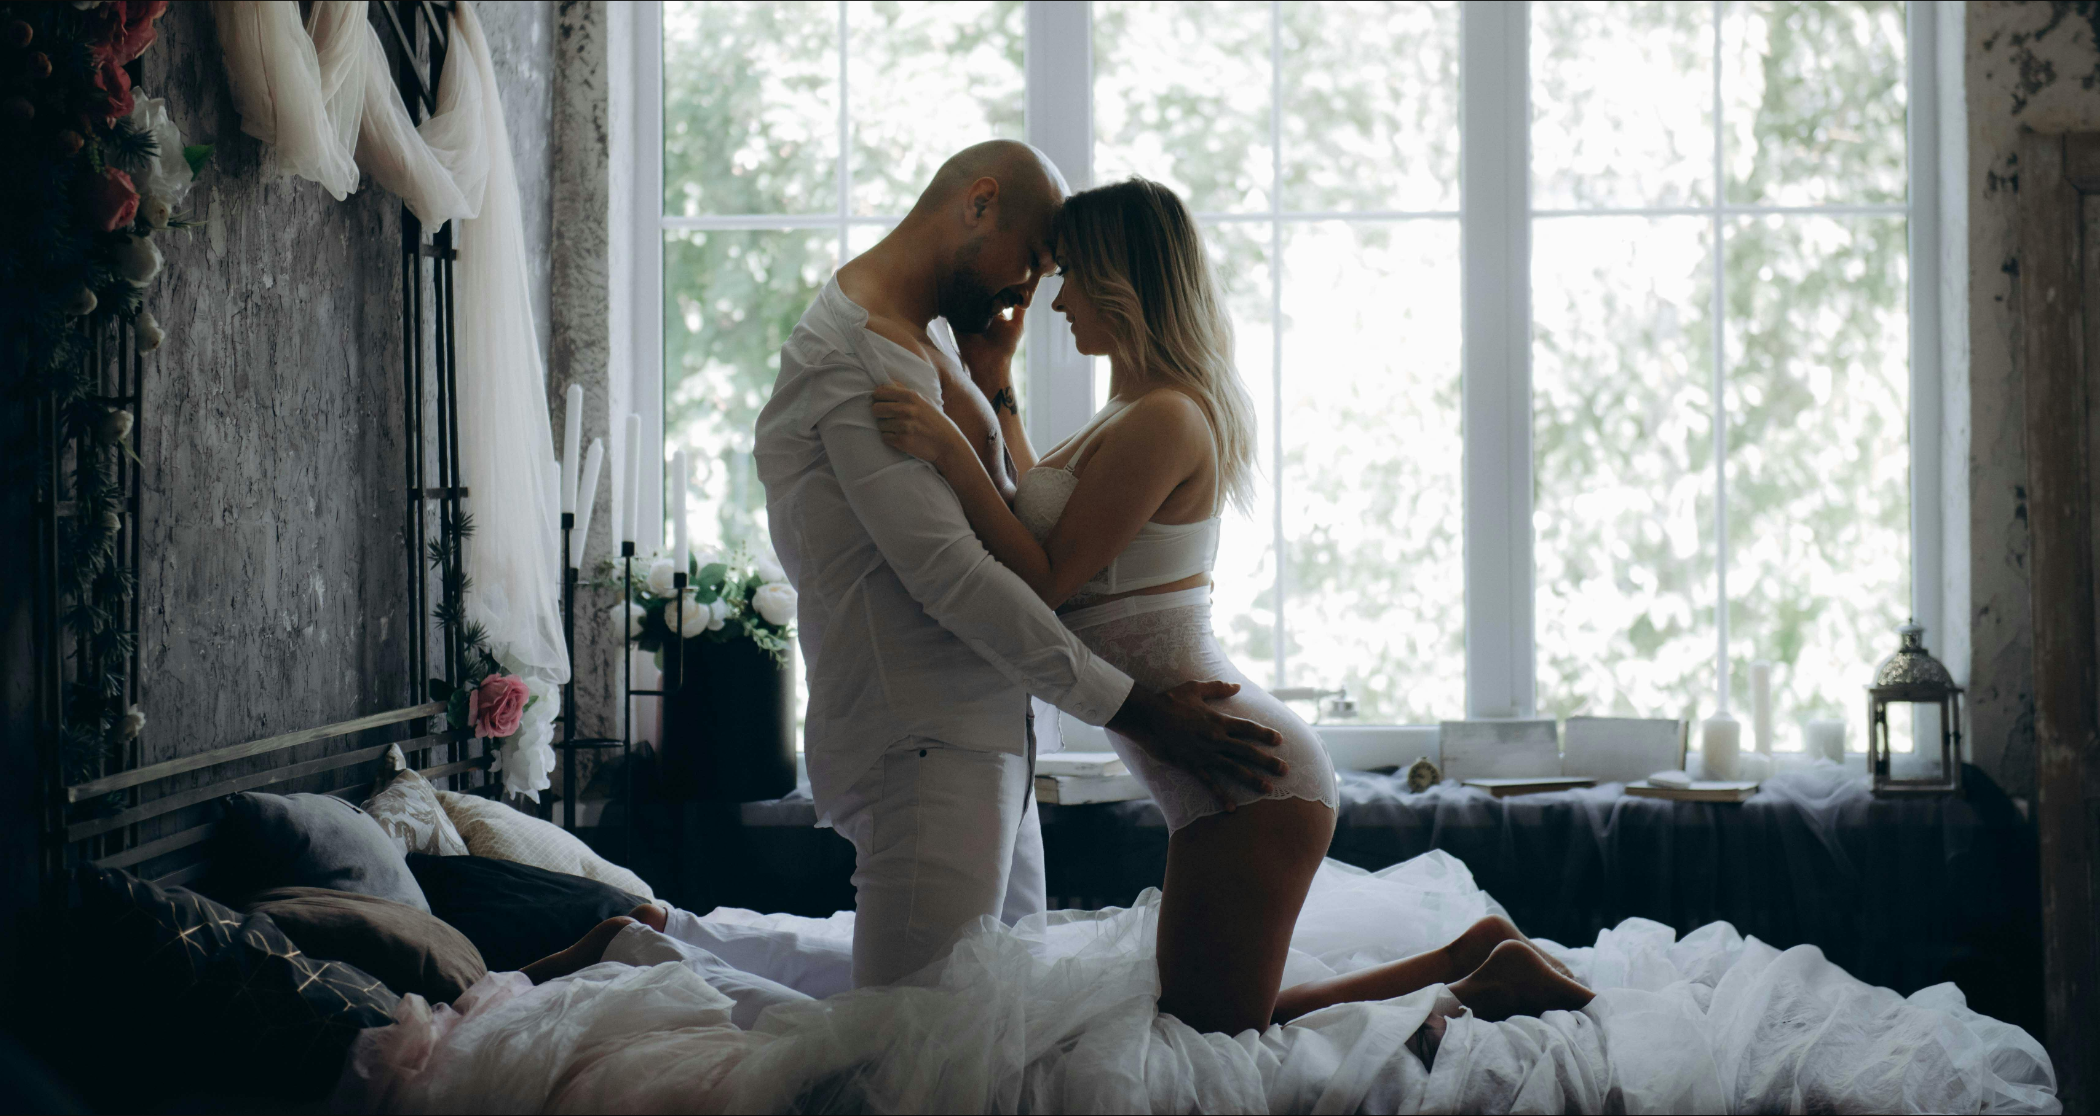 A romantic couple embracing by a window in a room with white bedding and candles.